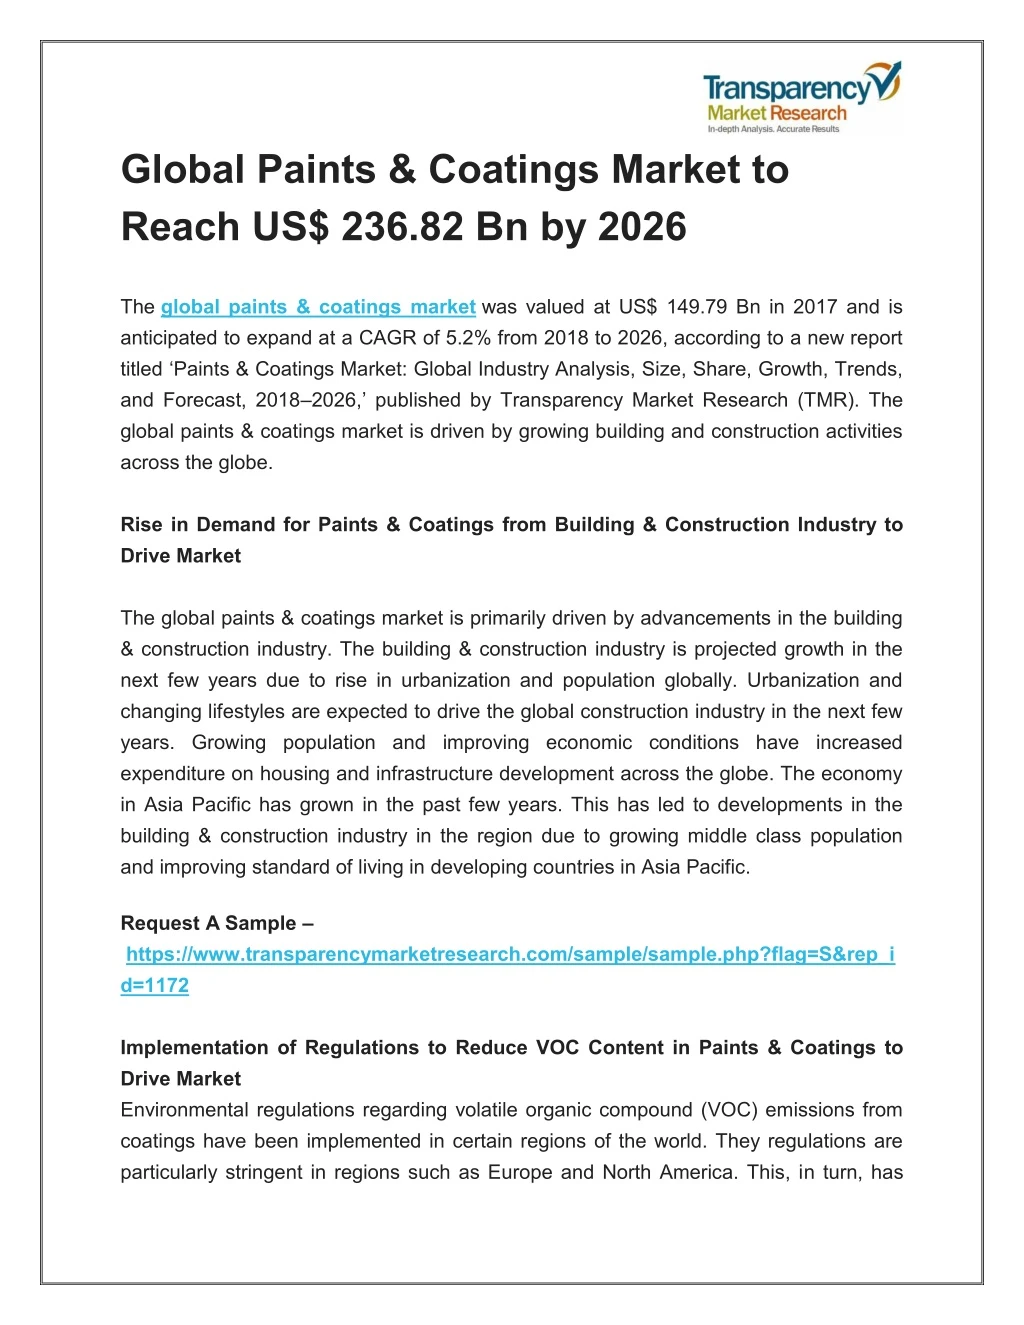 global paints coatings market to reach